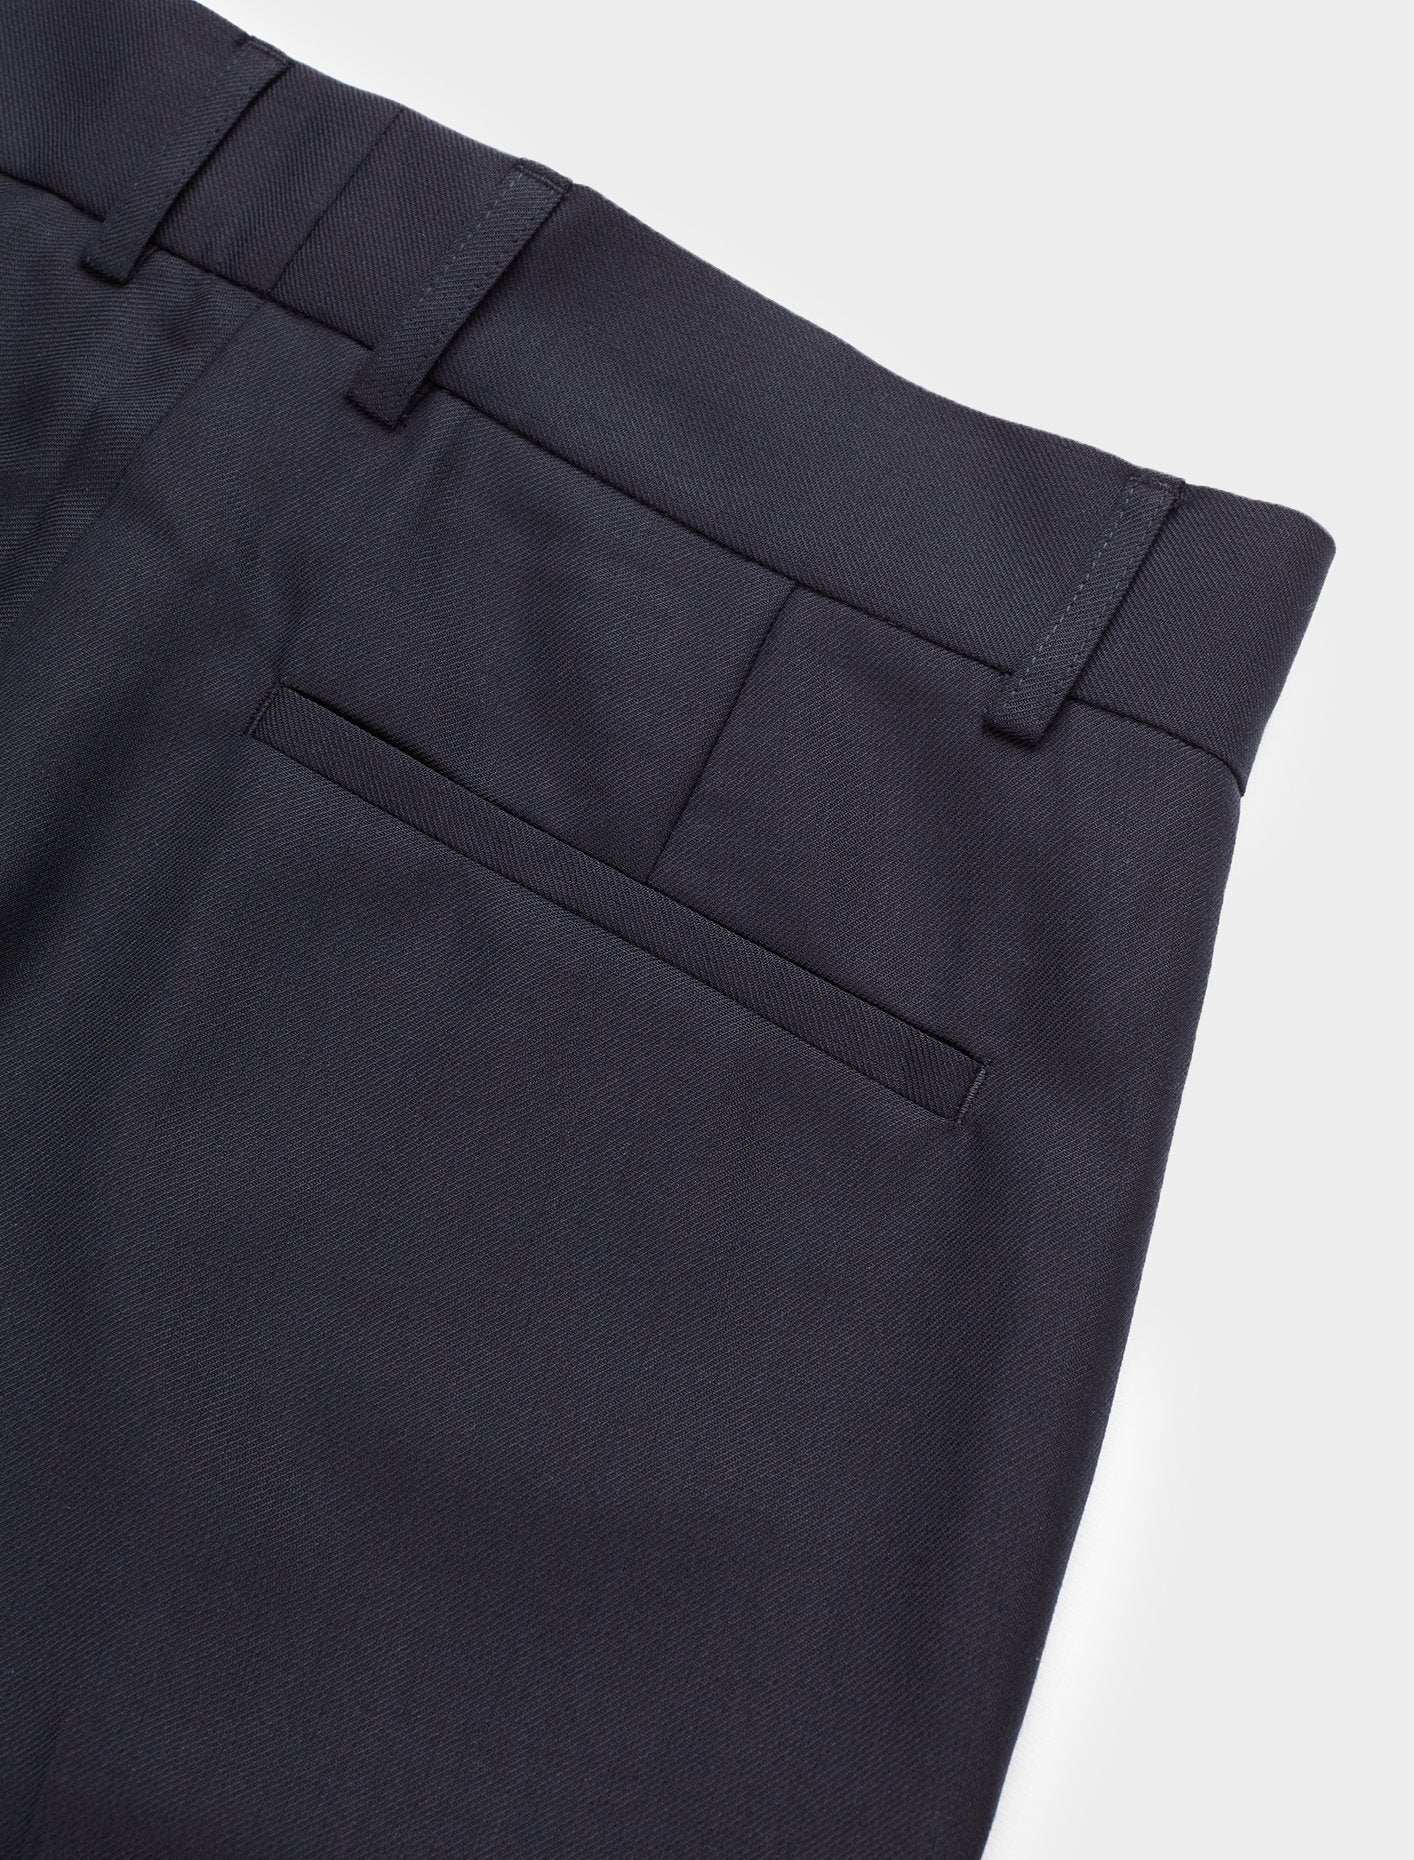 Mike Suit Trousers in Dark Navy